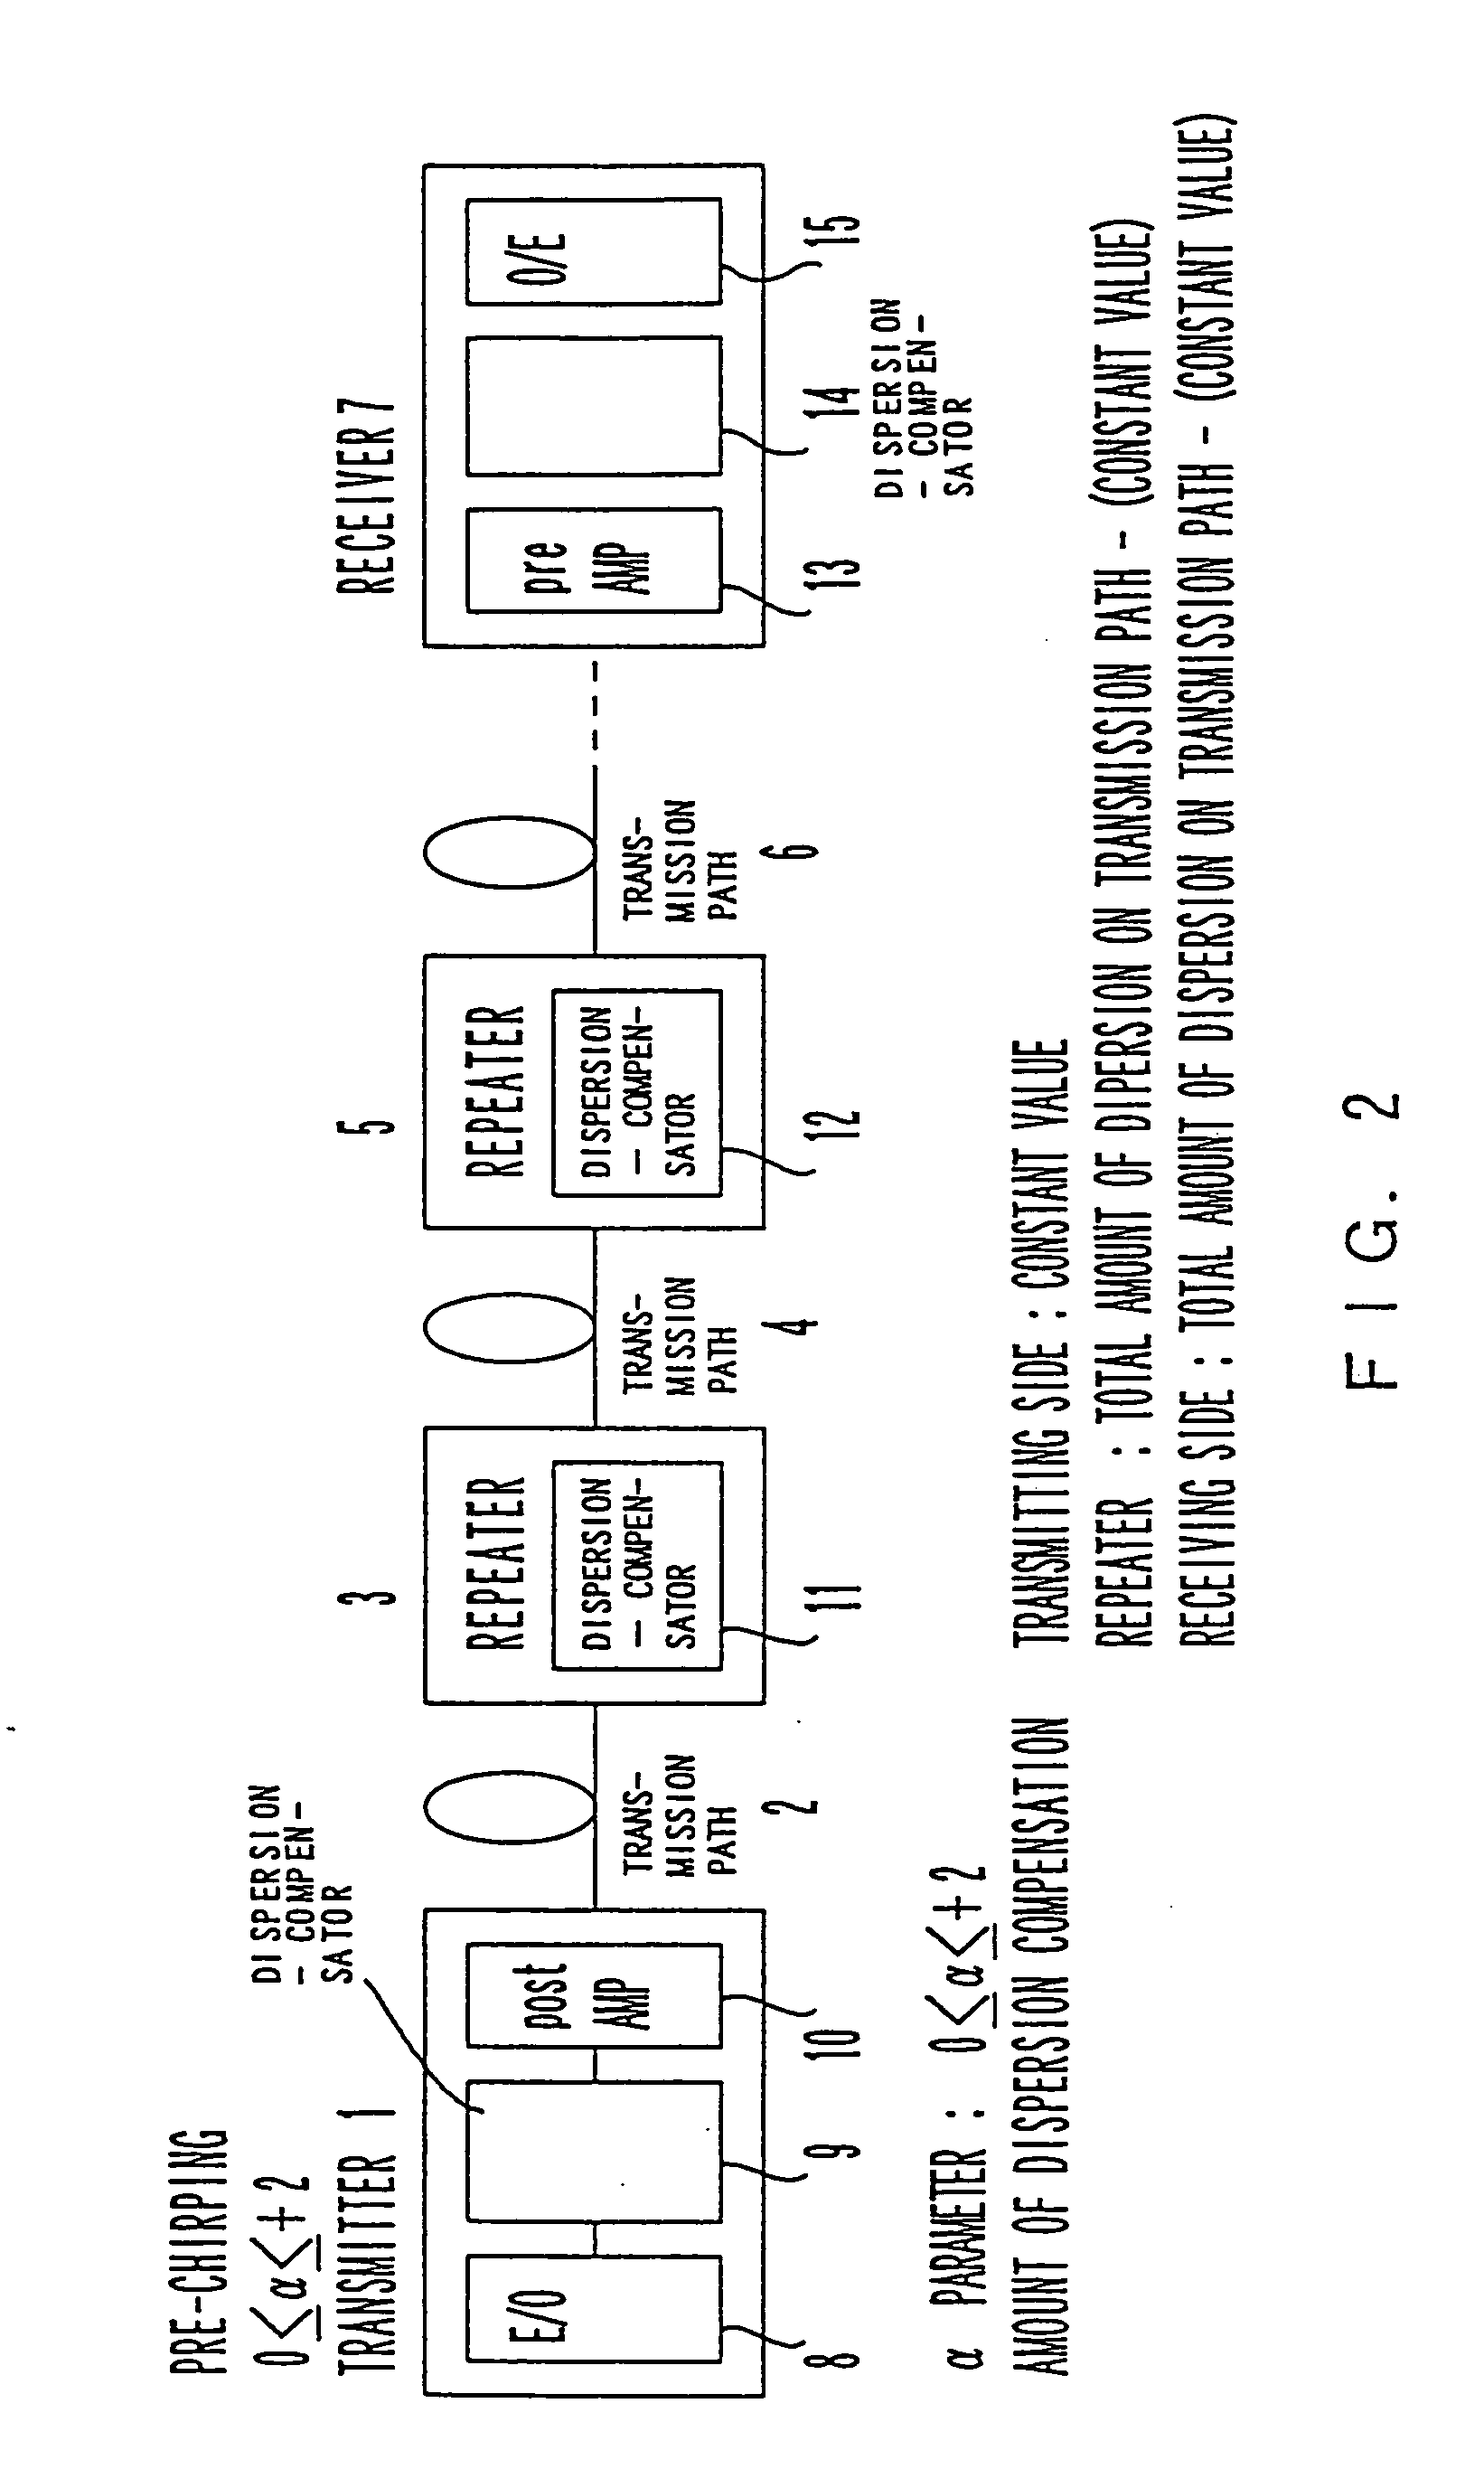 Optical transmission system using in-line amplifiers